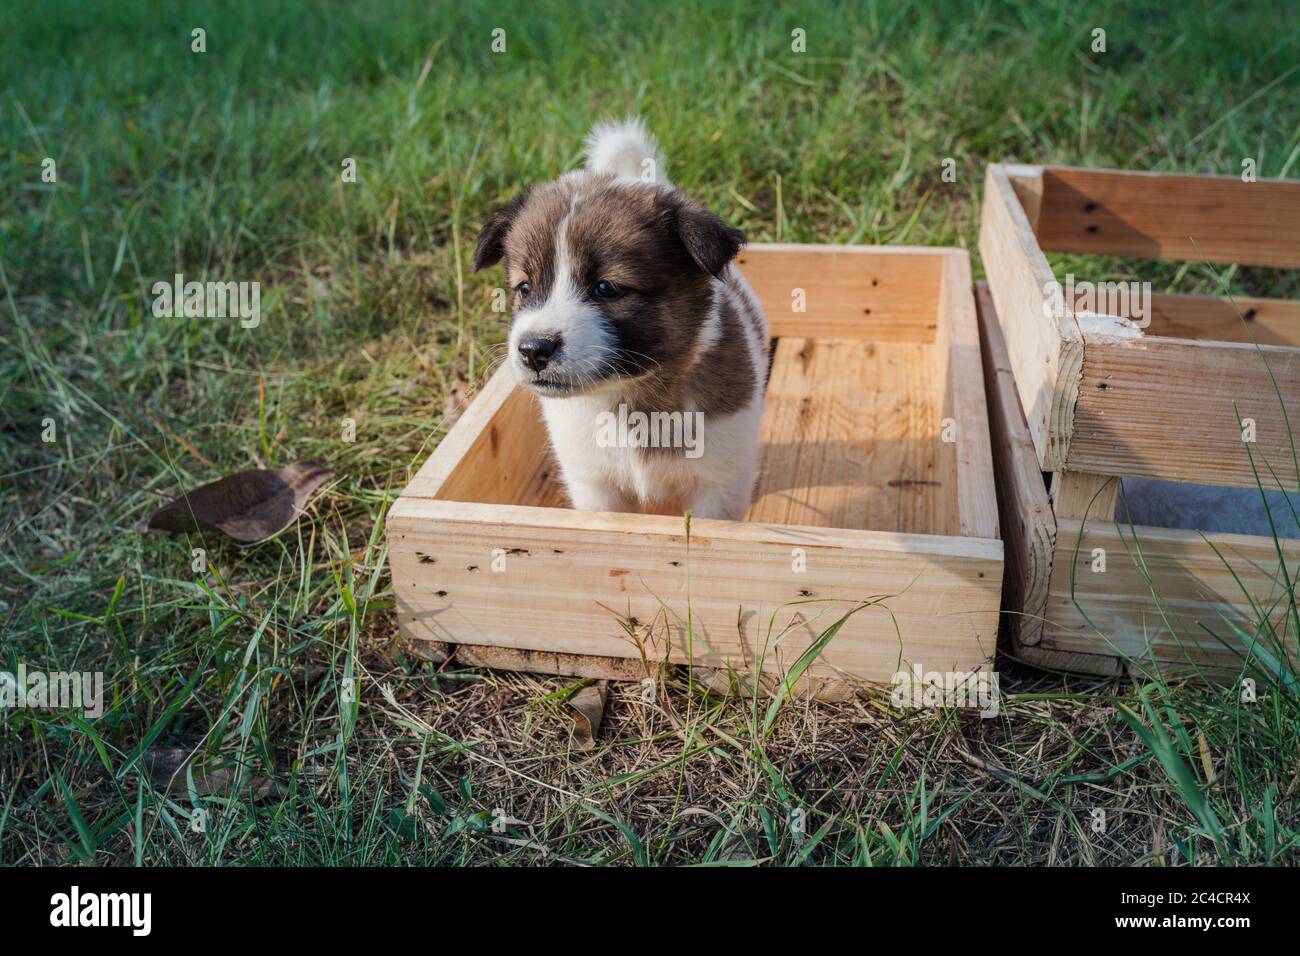 Thai Bangkaew Dog Puppies Are In The Wooden Box On The Grass Stock Photo Alamy